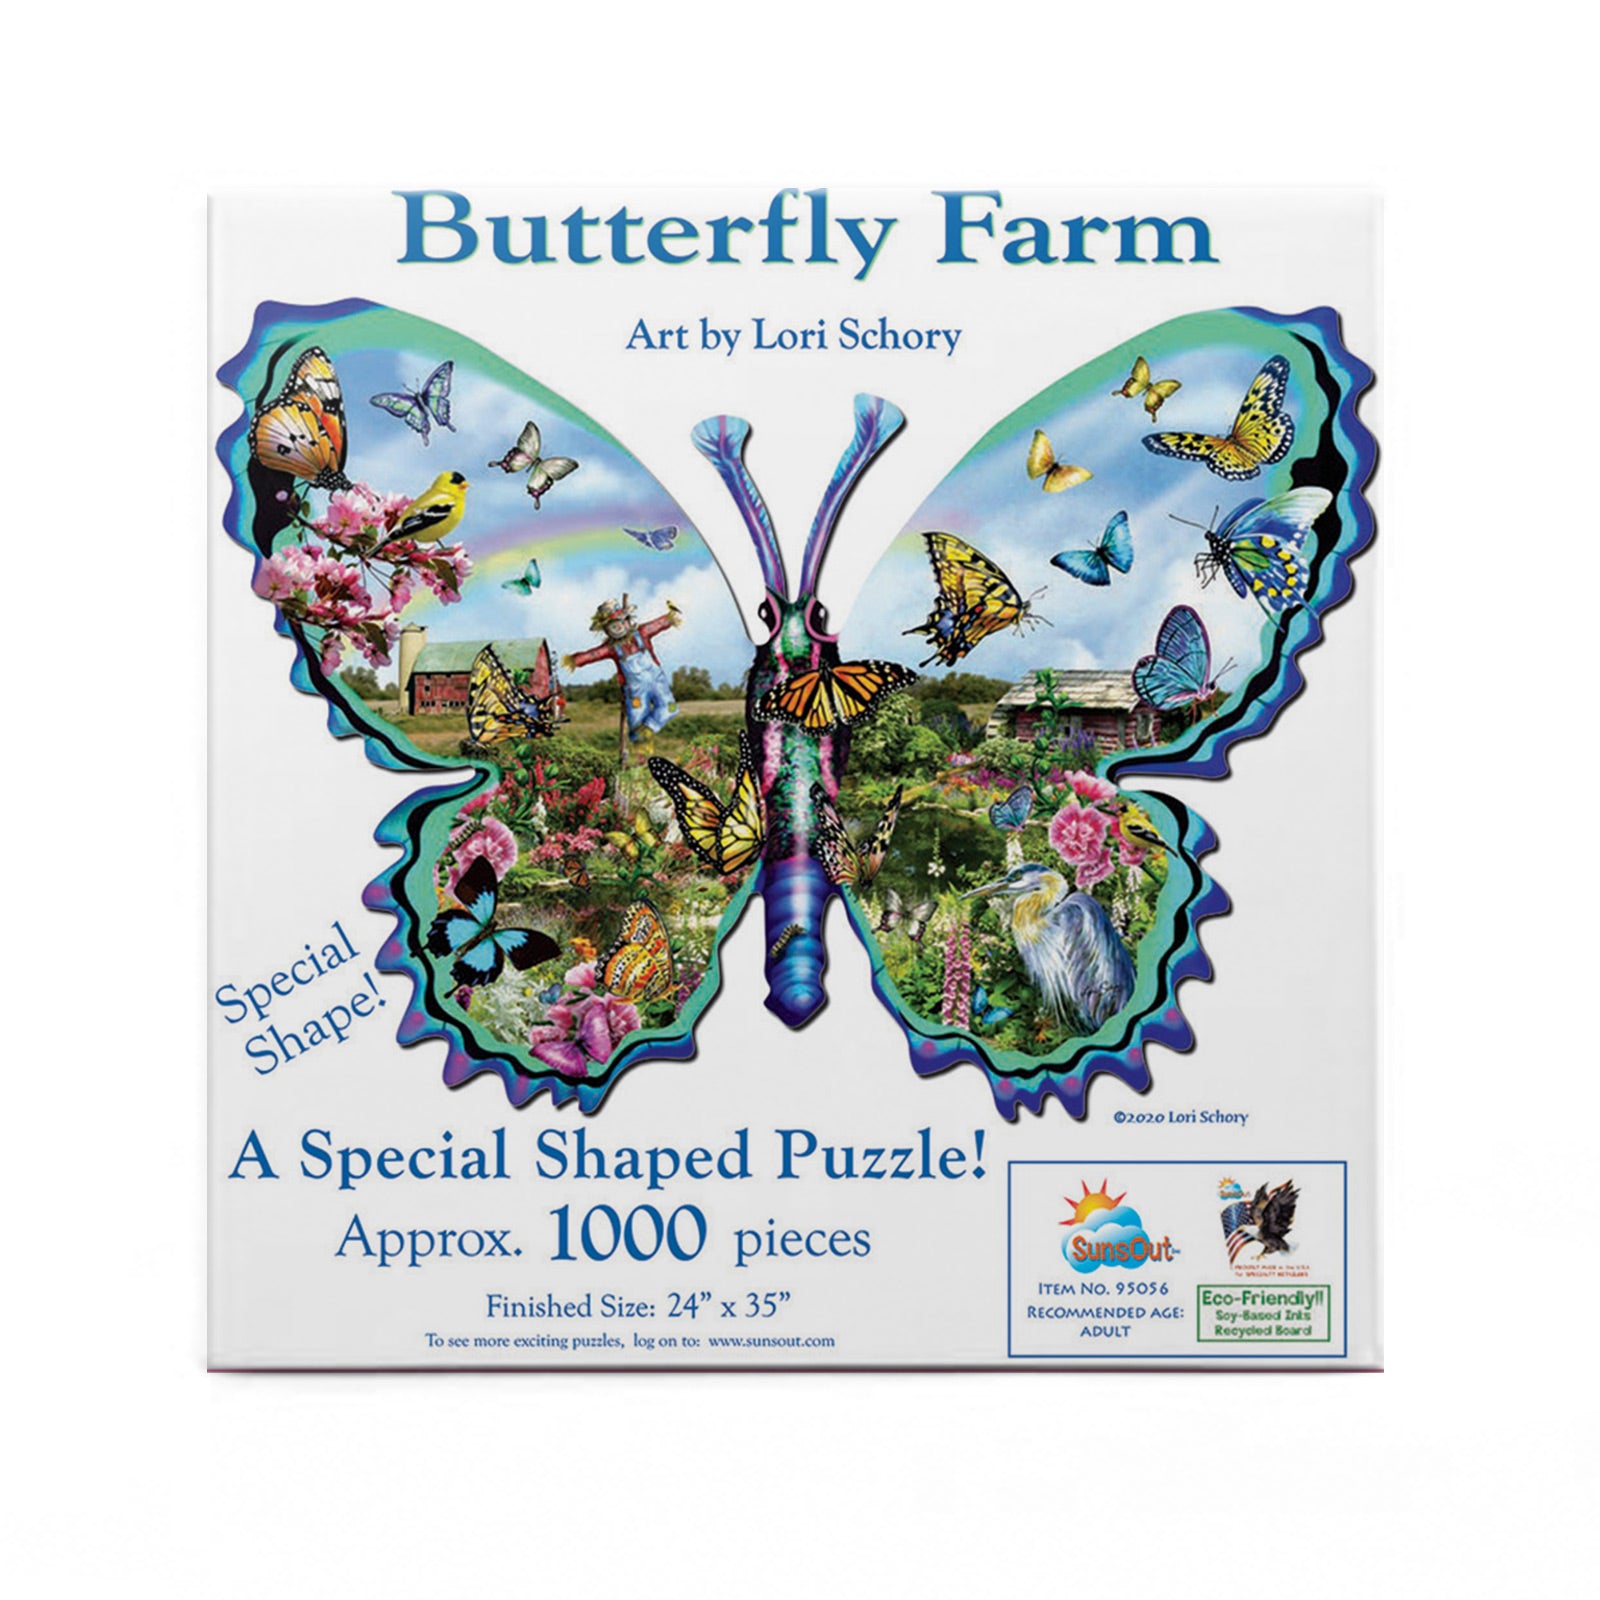 1000 Piece Jigsaw Puzzles in Puzzles 